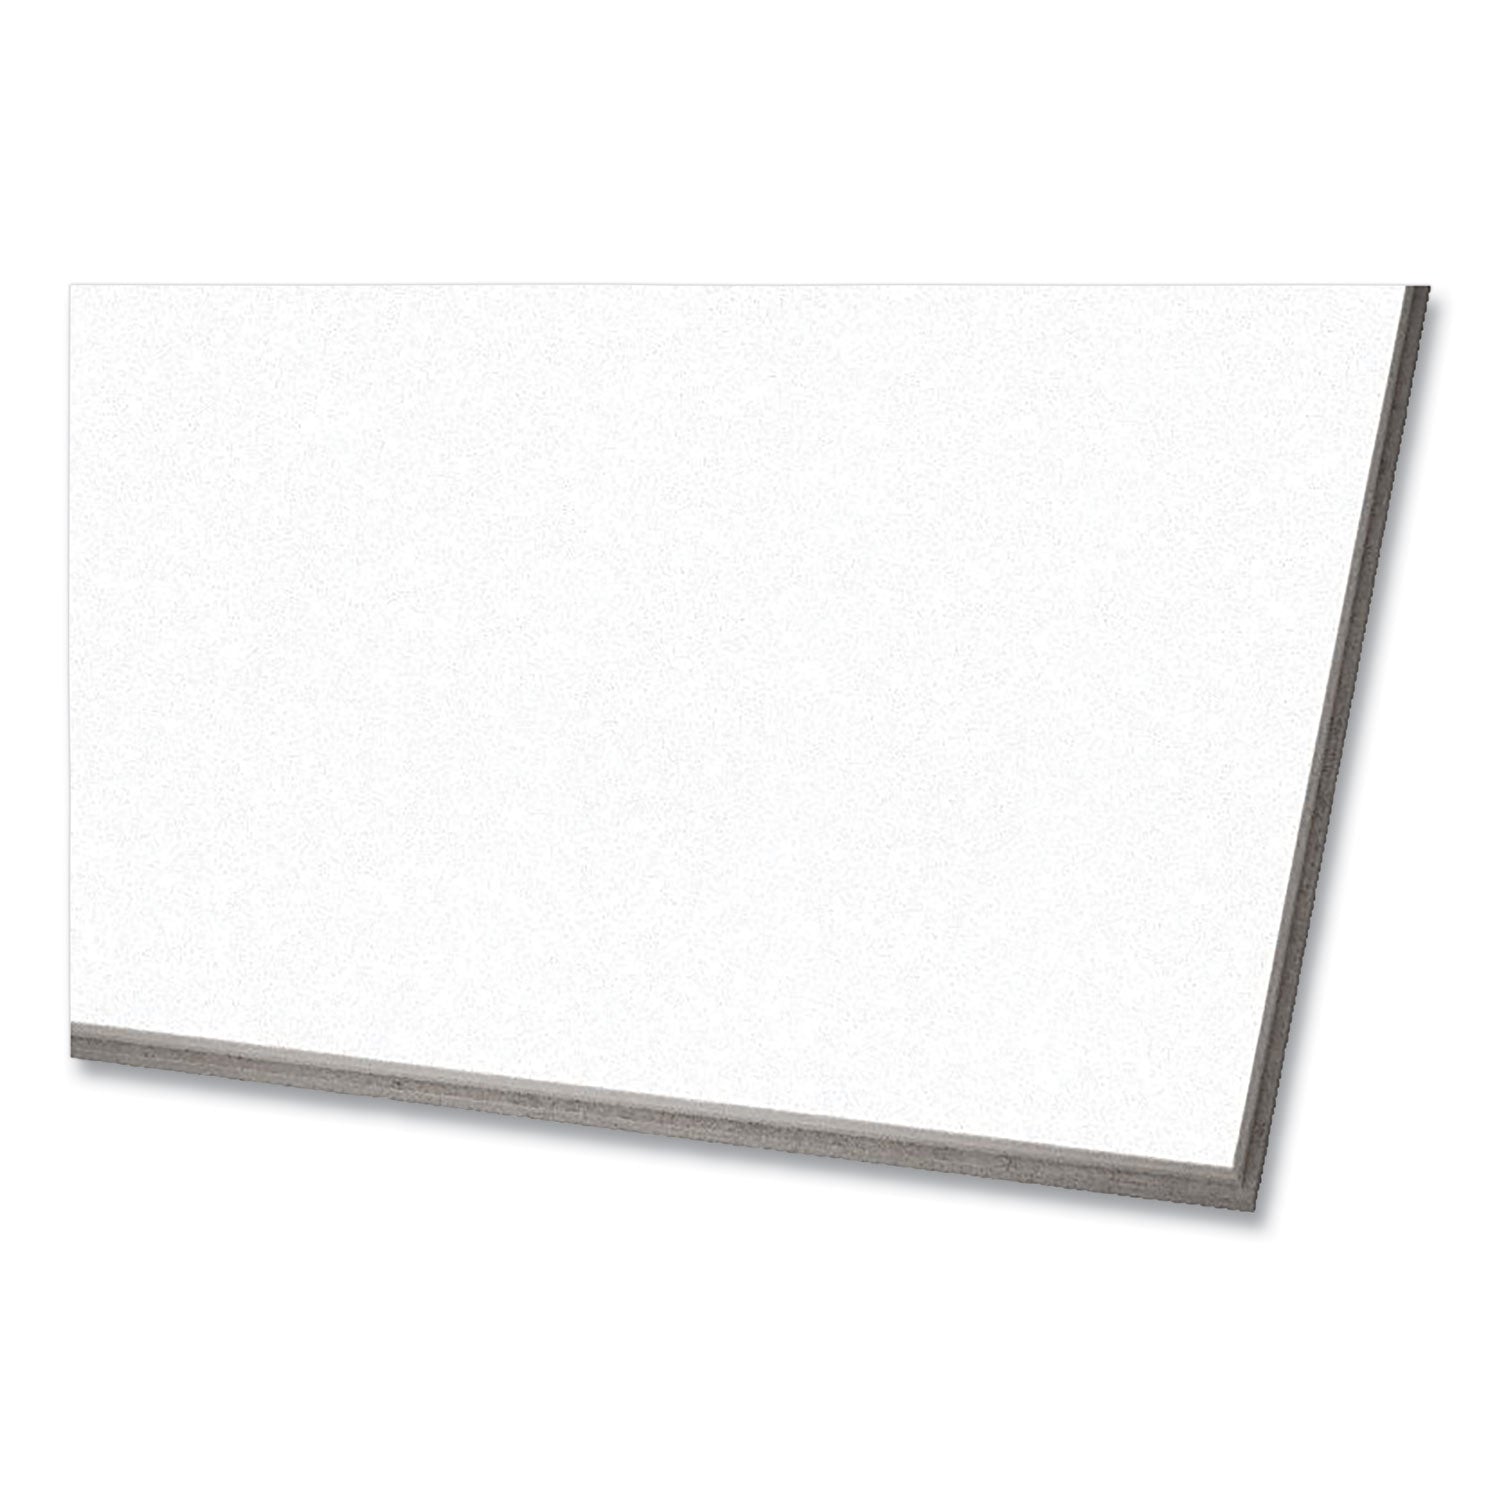 ultima-ceiling-tiles-non-directional-square-lay-in-094-24-x-48-x-075-white-6-carton_ack1913a - 1